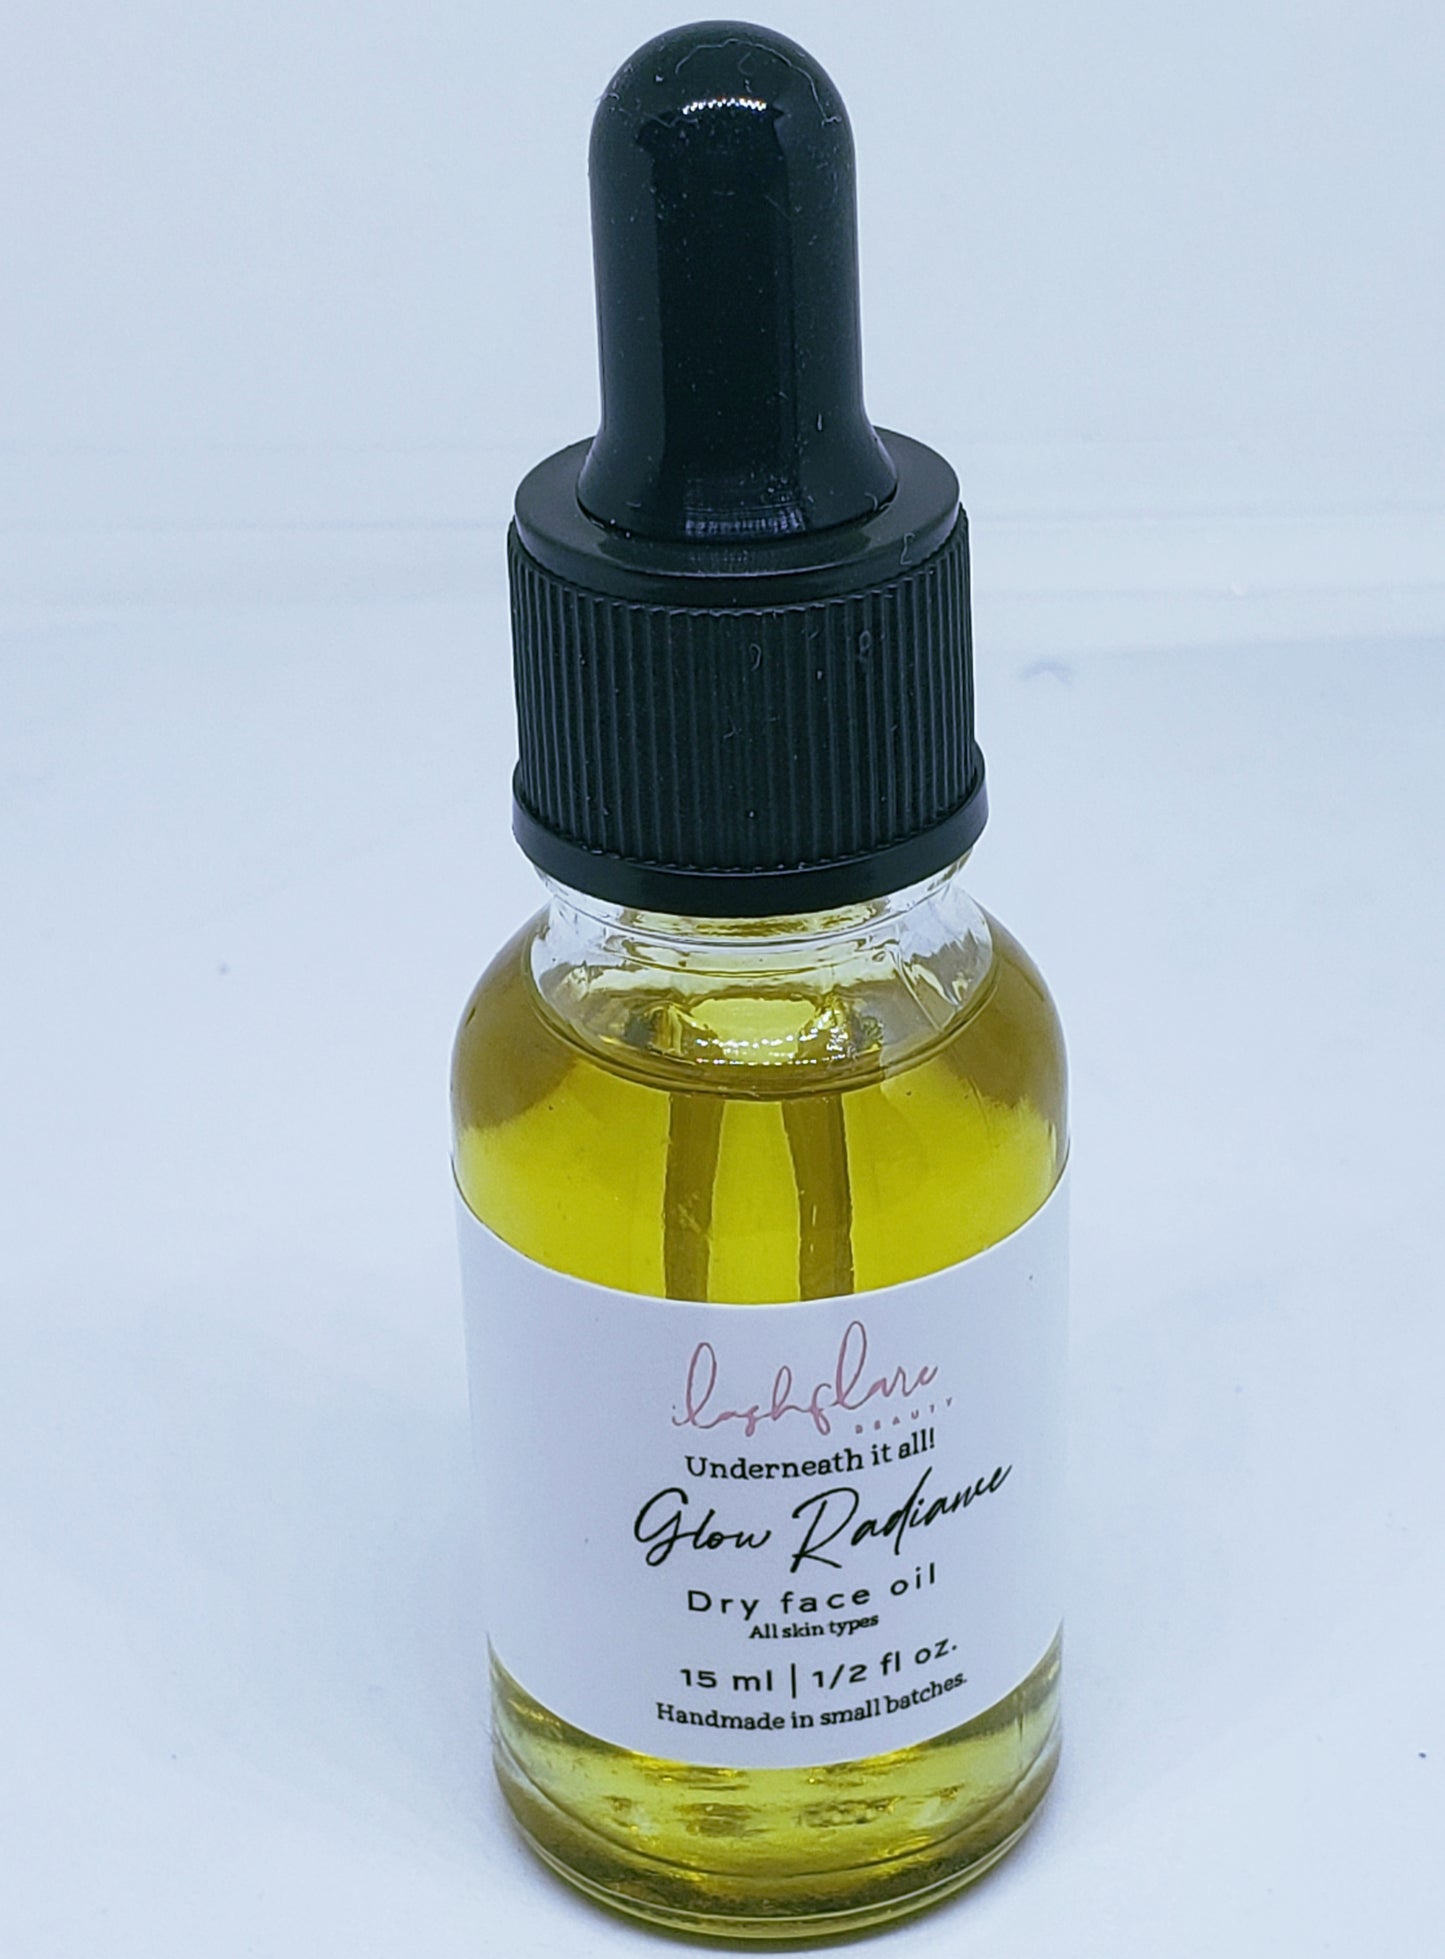 Glow Radiance Face Oil